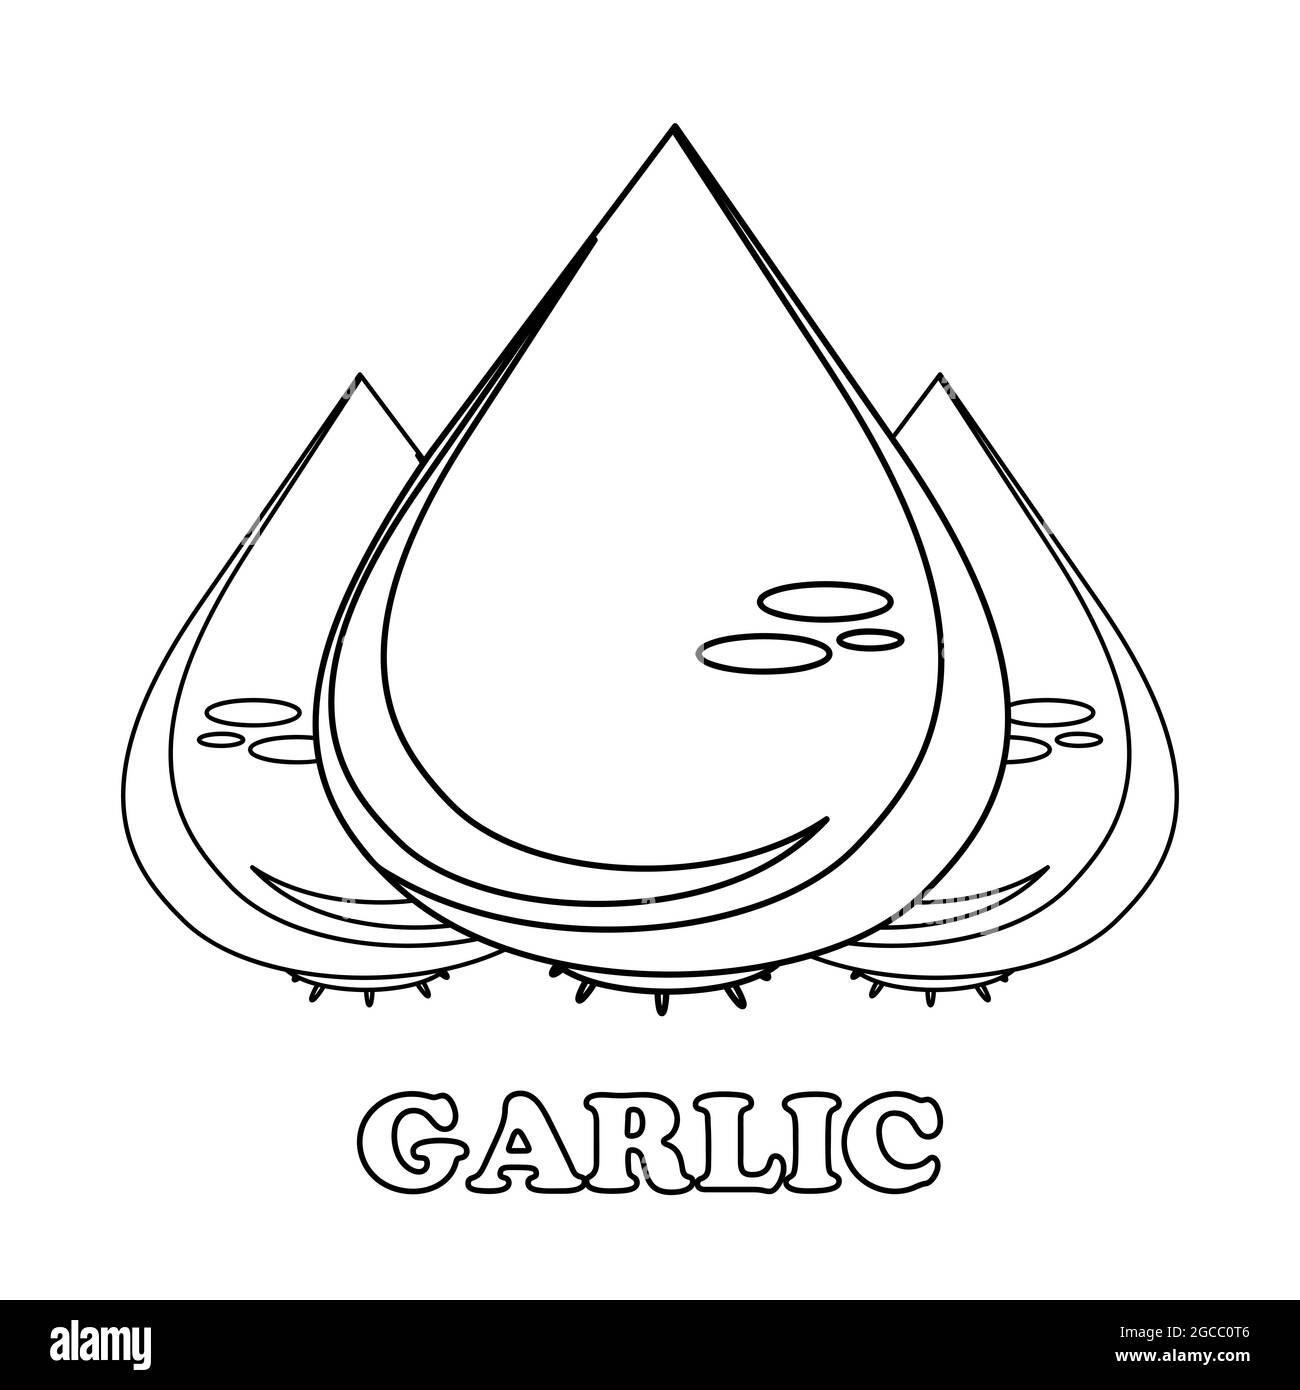 garlic coloring page. healthy food coloring page for children. on white background Stock Photo